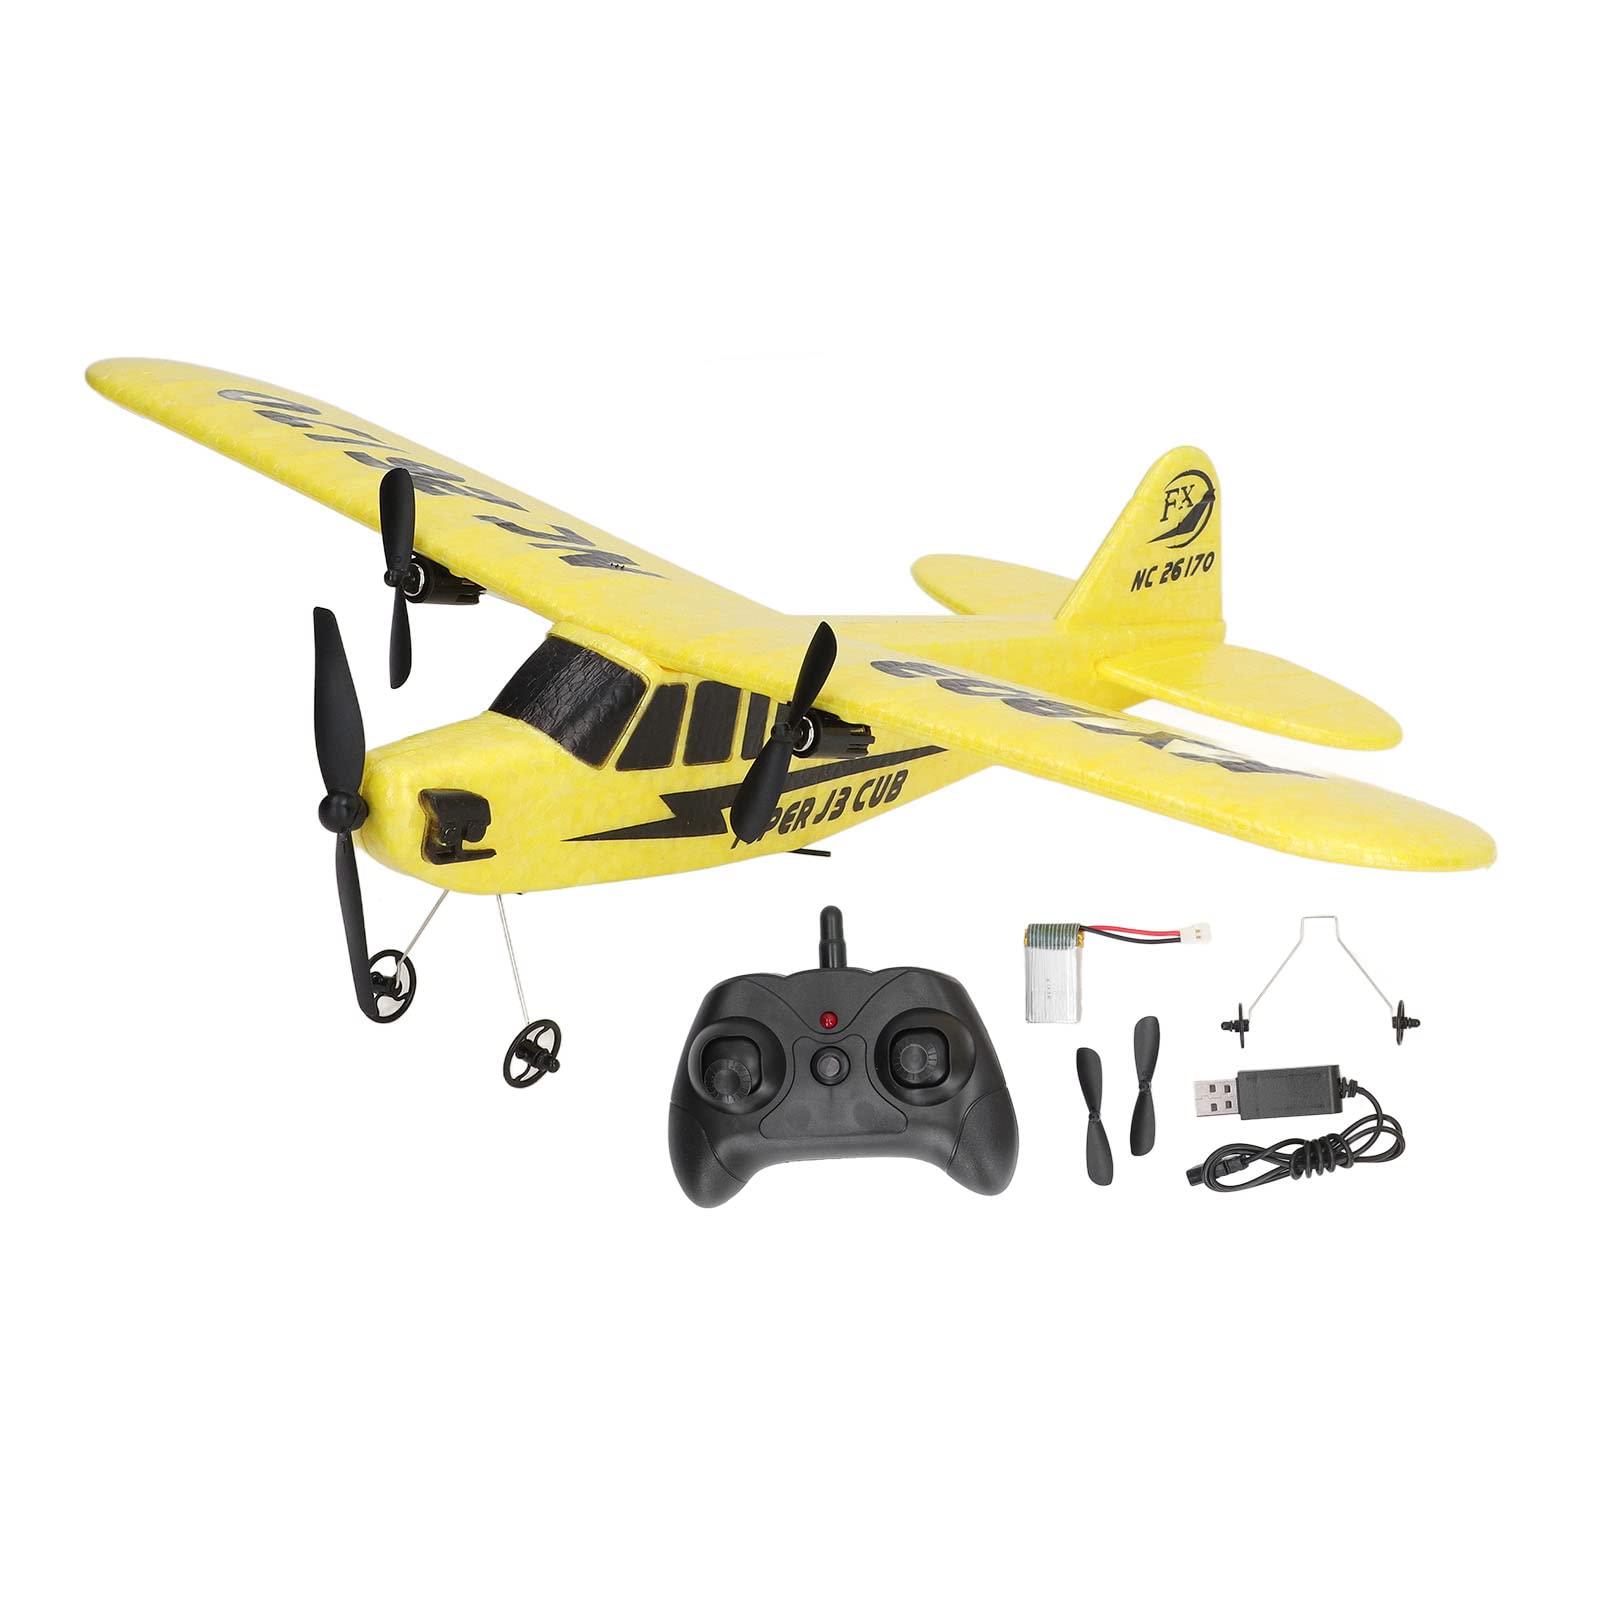 Electric Remote Control Planes: Types of Electric Remote Control Planes